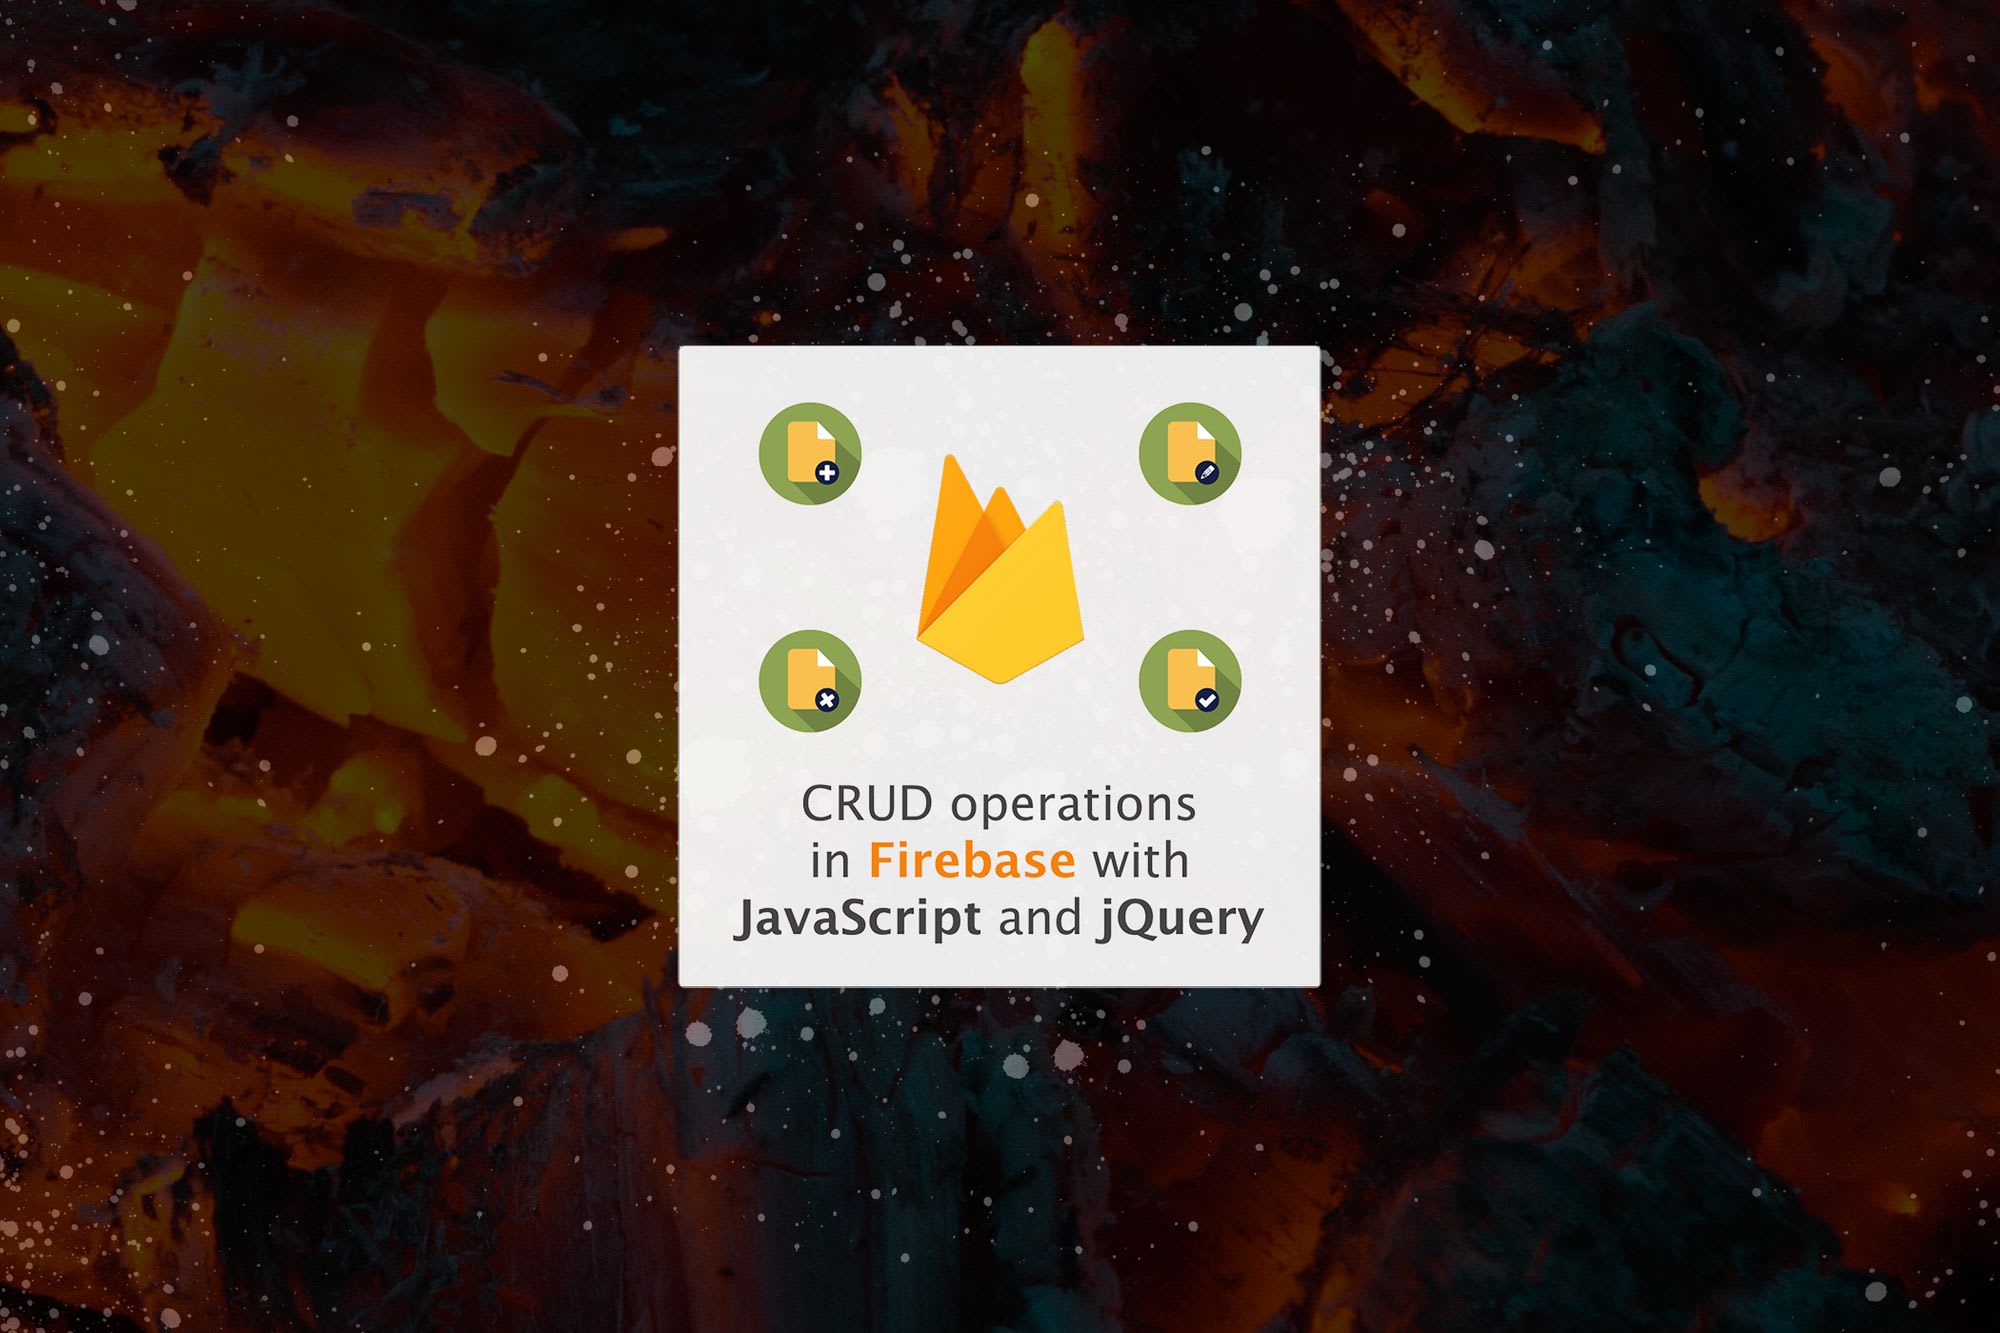 Firebase CRUD operations with JavaScript and jQuery